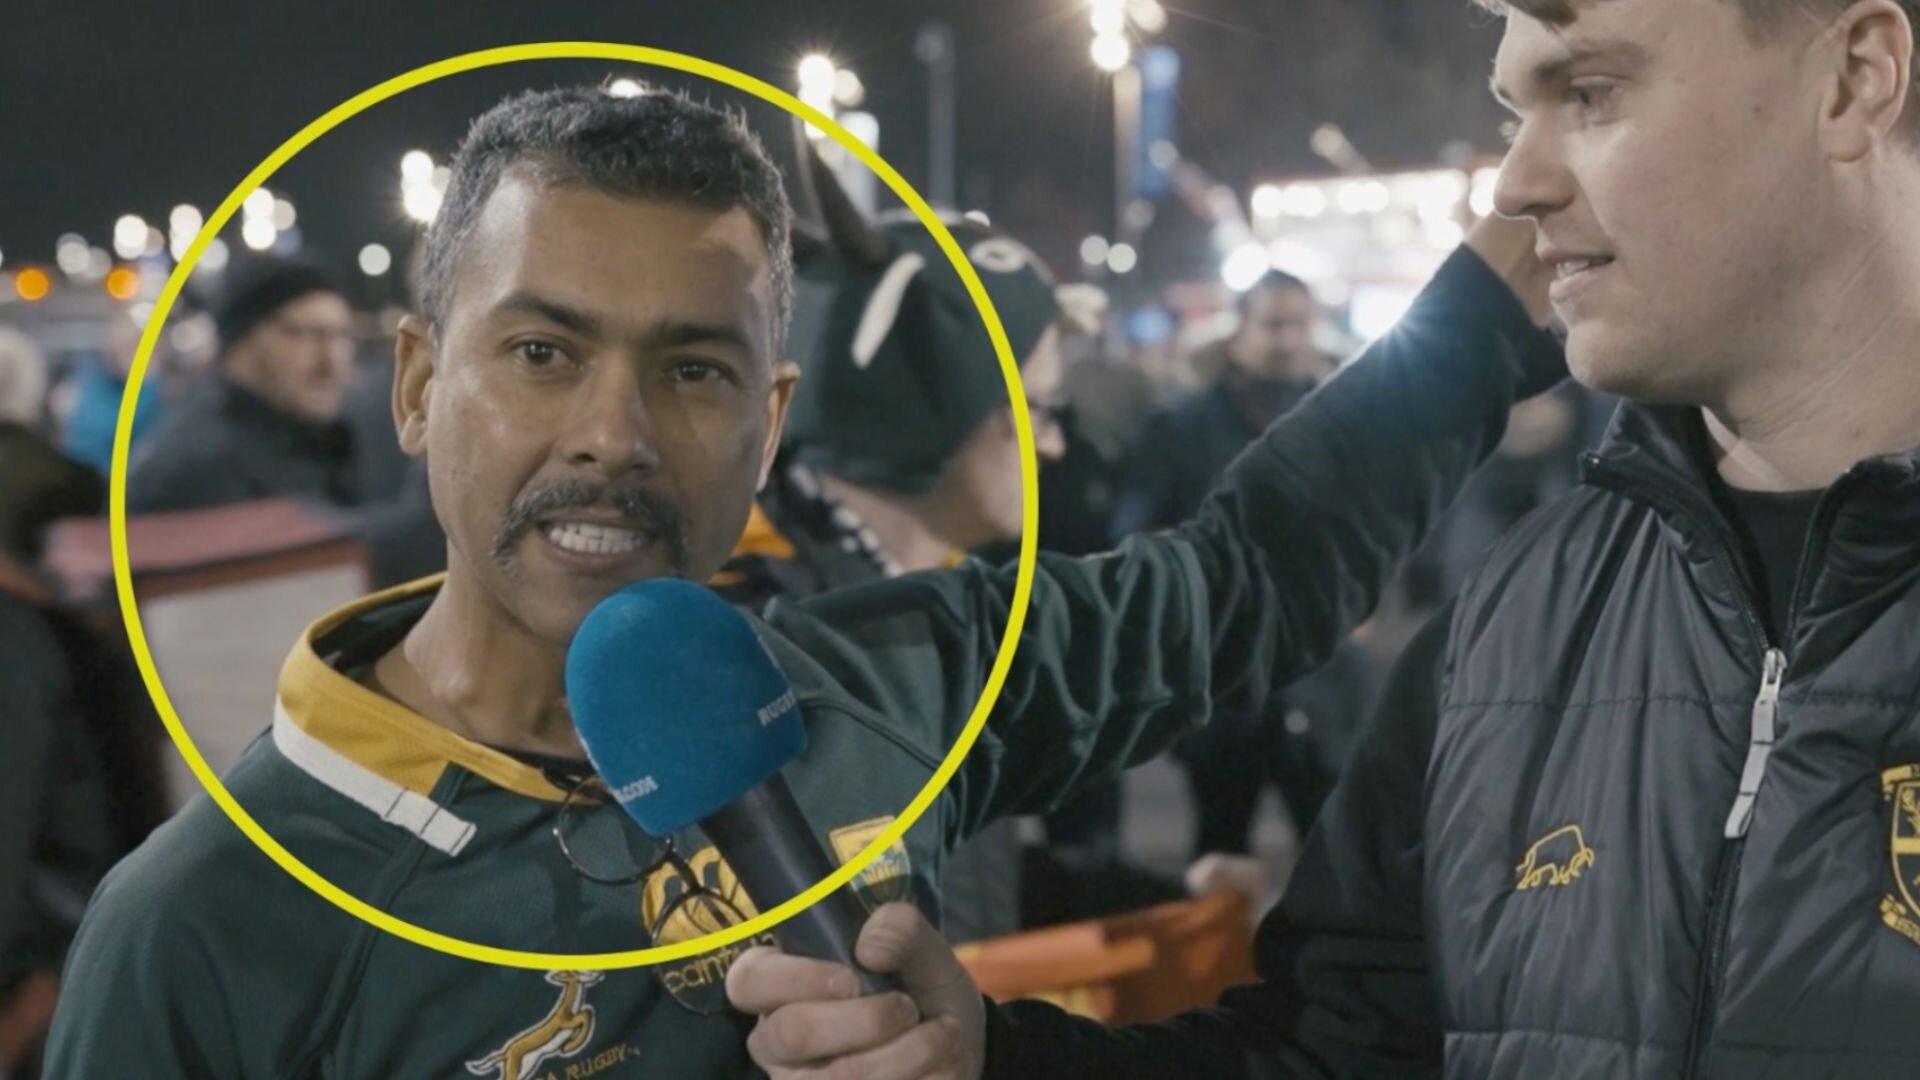 Springbok rugby fans go full rogue as they react to win over England